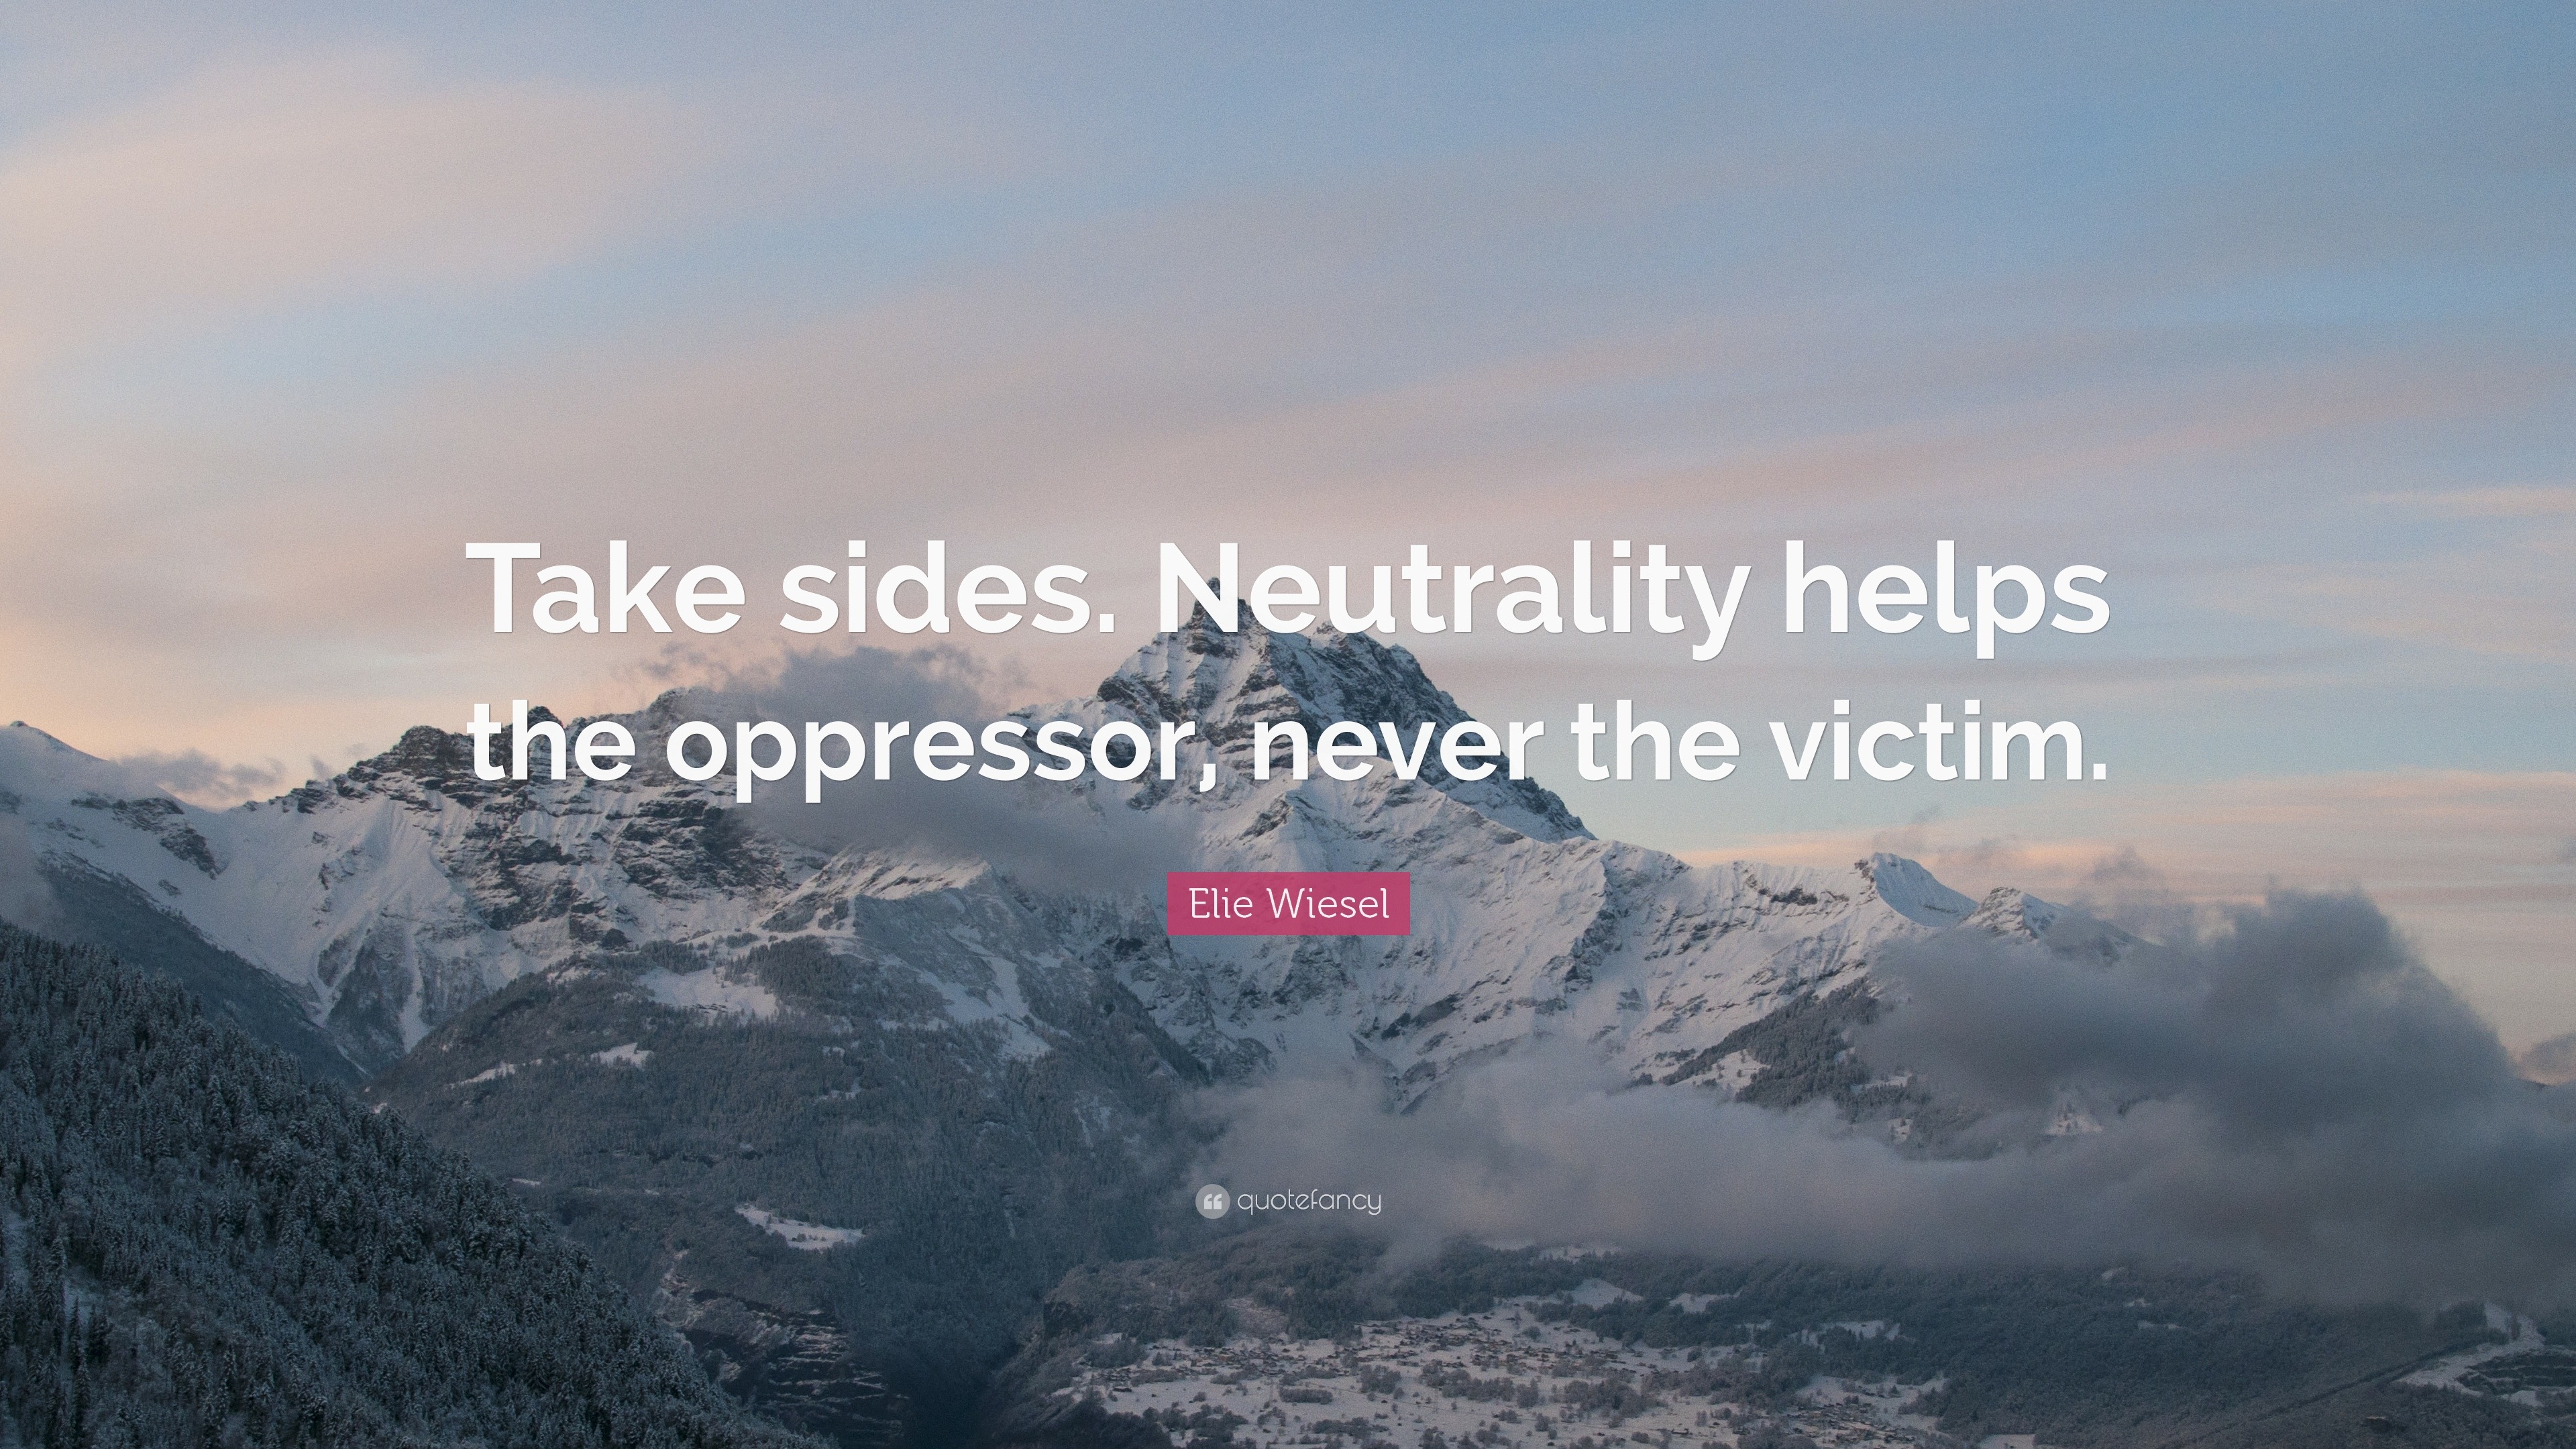 Neutrality helps the oppressor never the victim essay